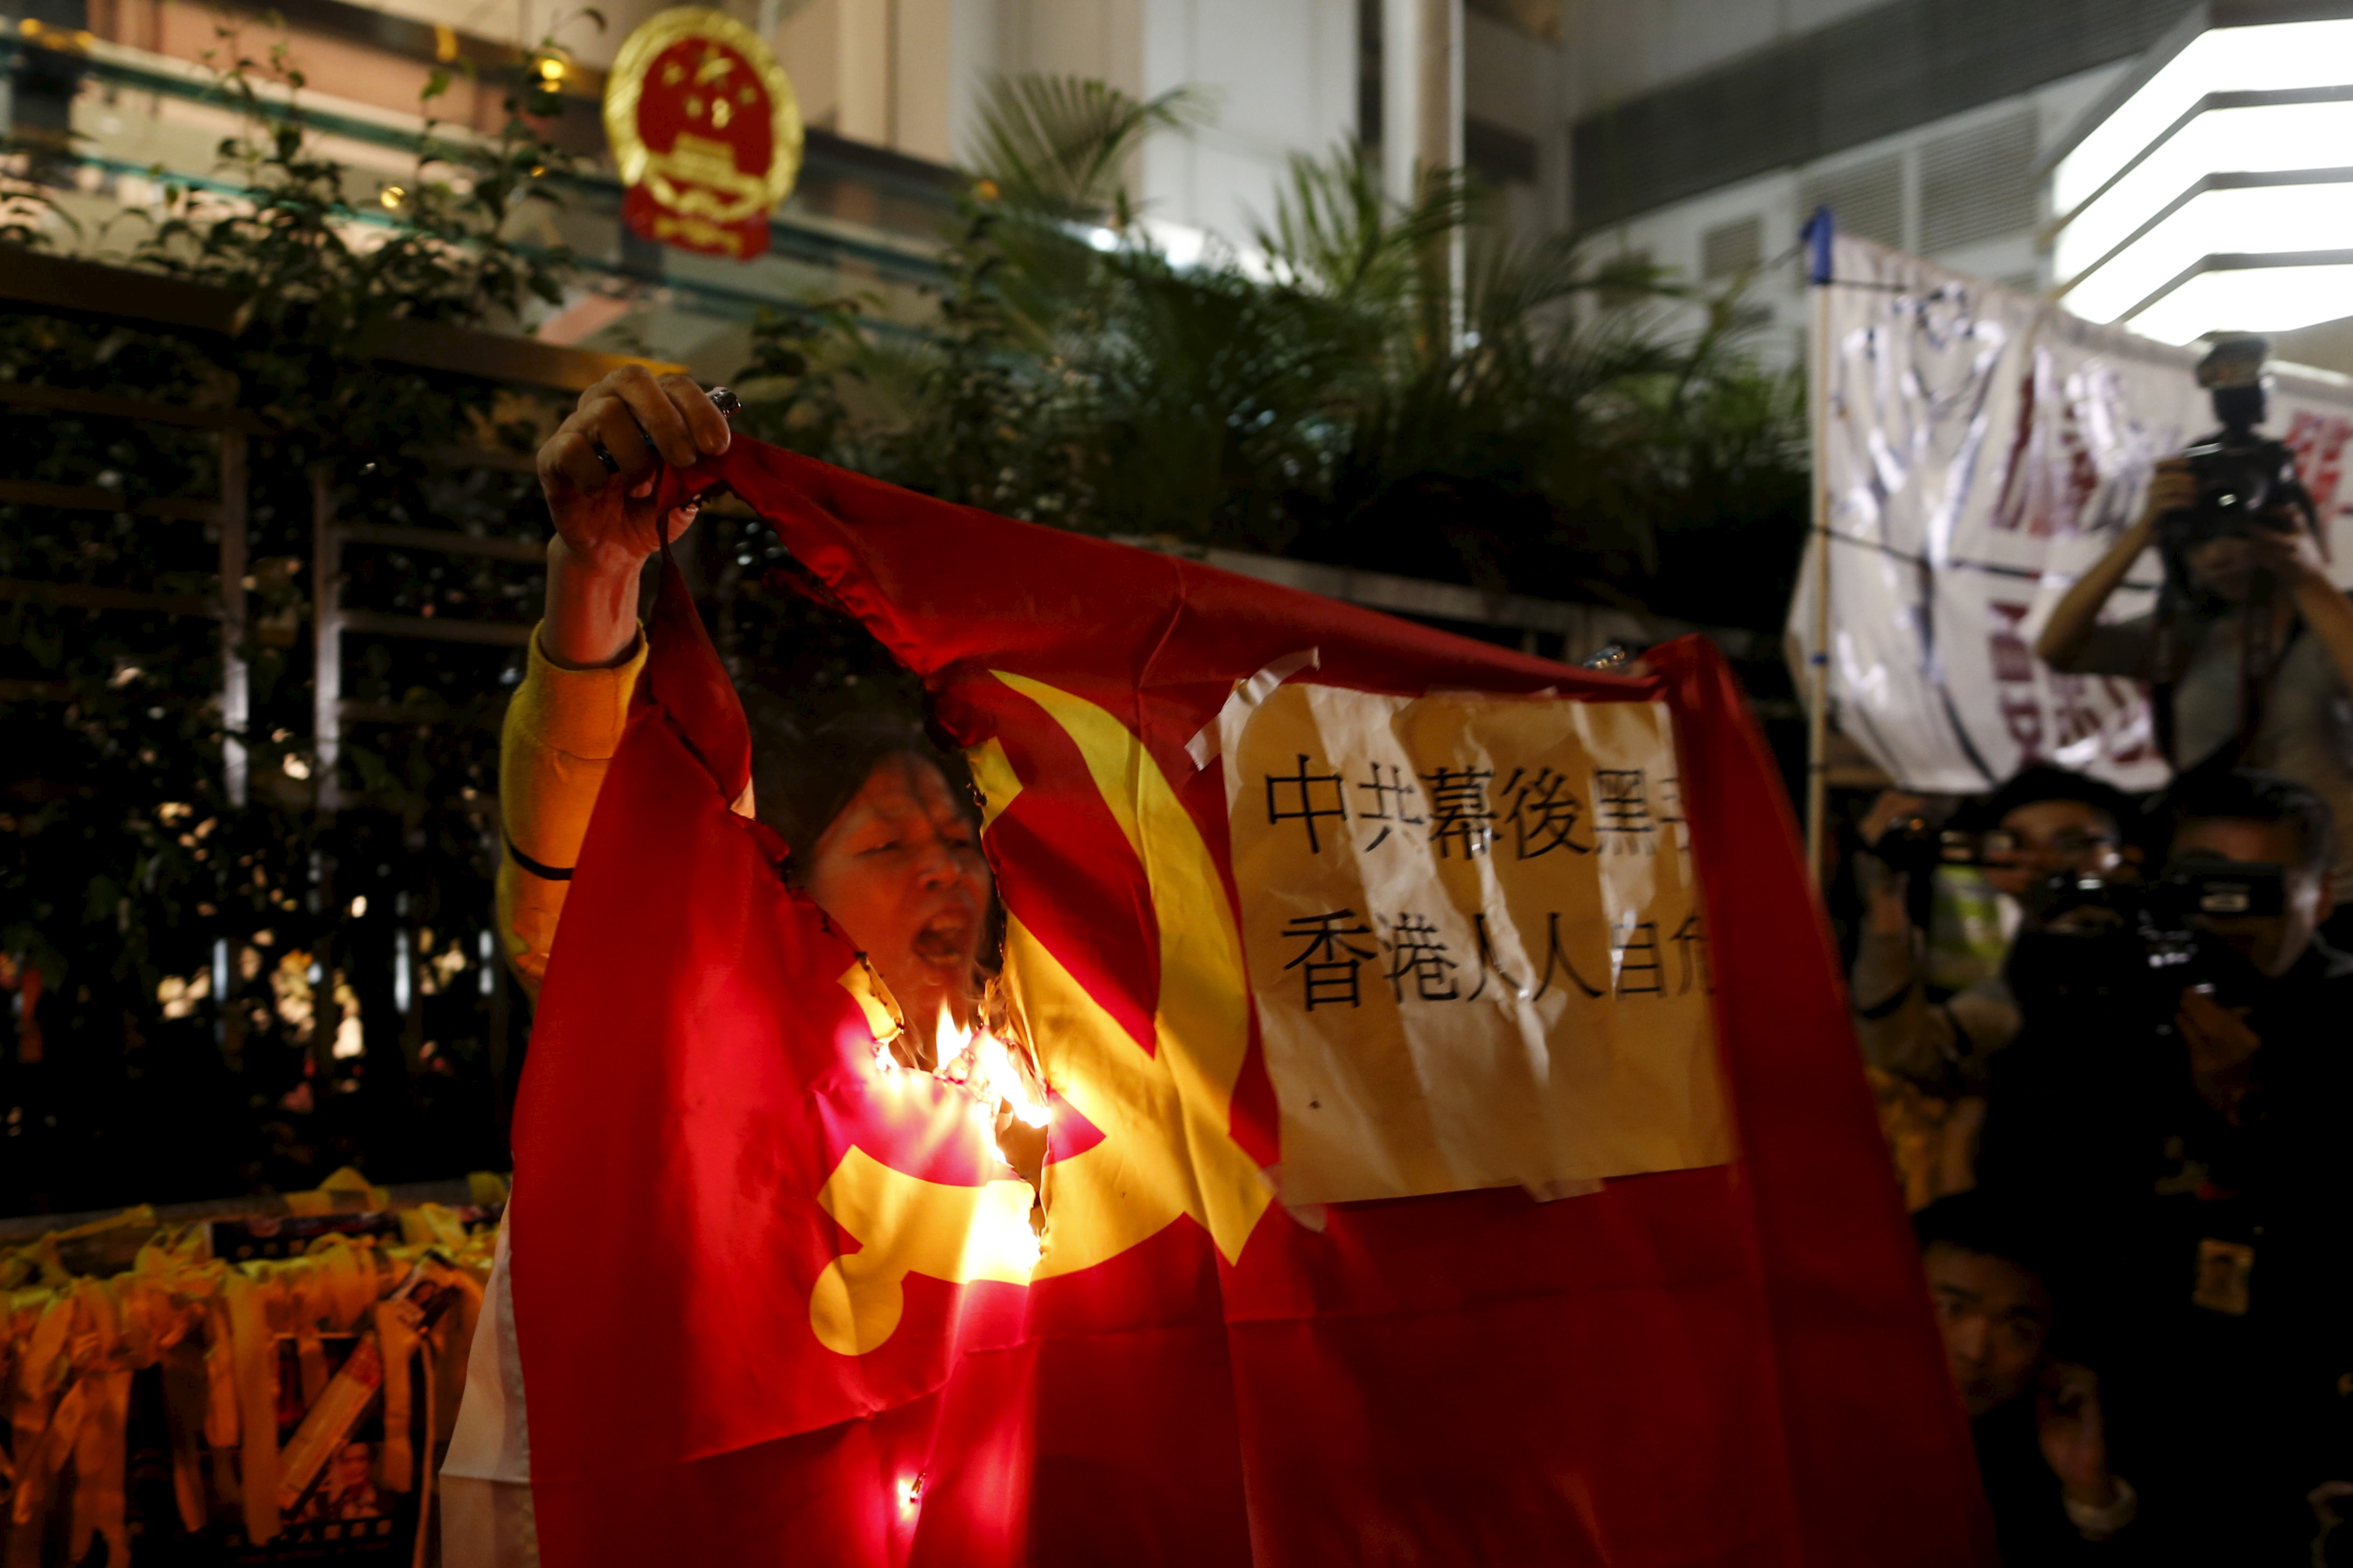 A demonstrator burns a flag of the Communist Party of China during a protest over the disappearance of booksellers, outside the Chinese liaison office in Hong Kong, China